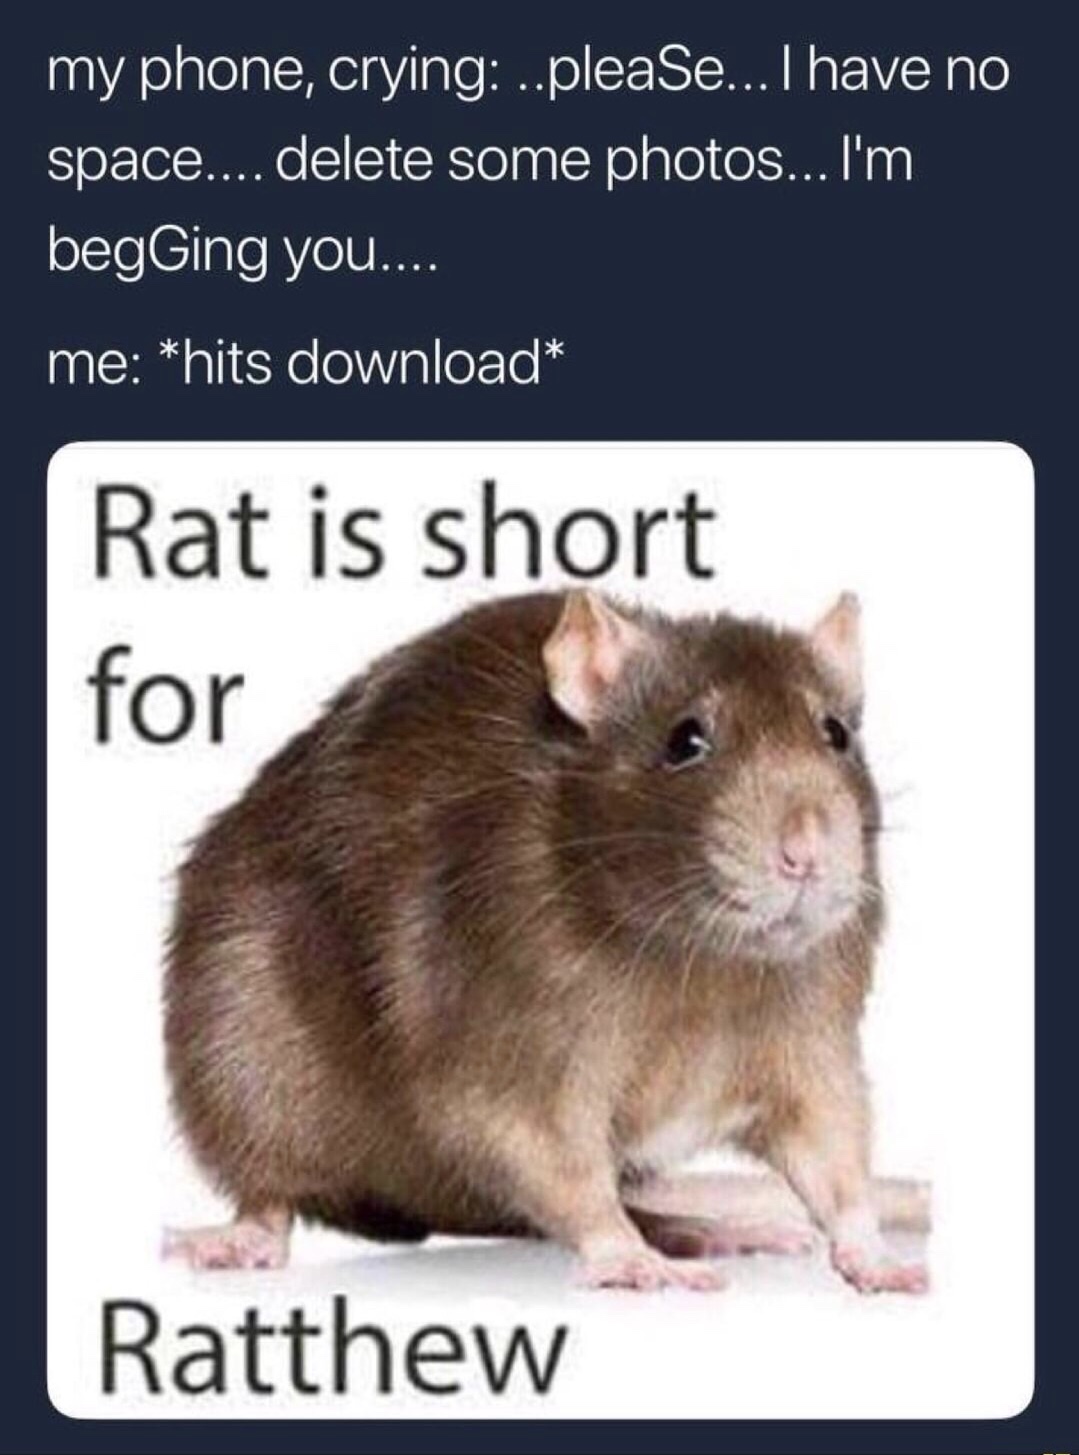 rat short for ratthew - my phone, crying ..pleaSe... I have no space.... delete some photos... I'm begGing you.... me hits download Rat is short for Ratthew